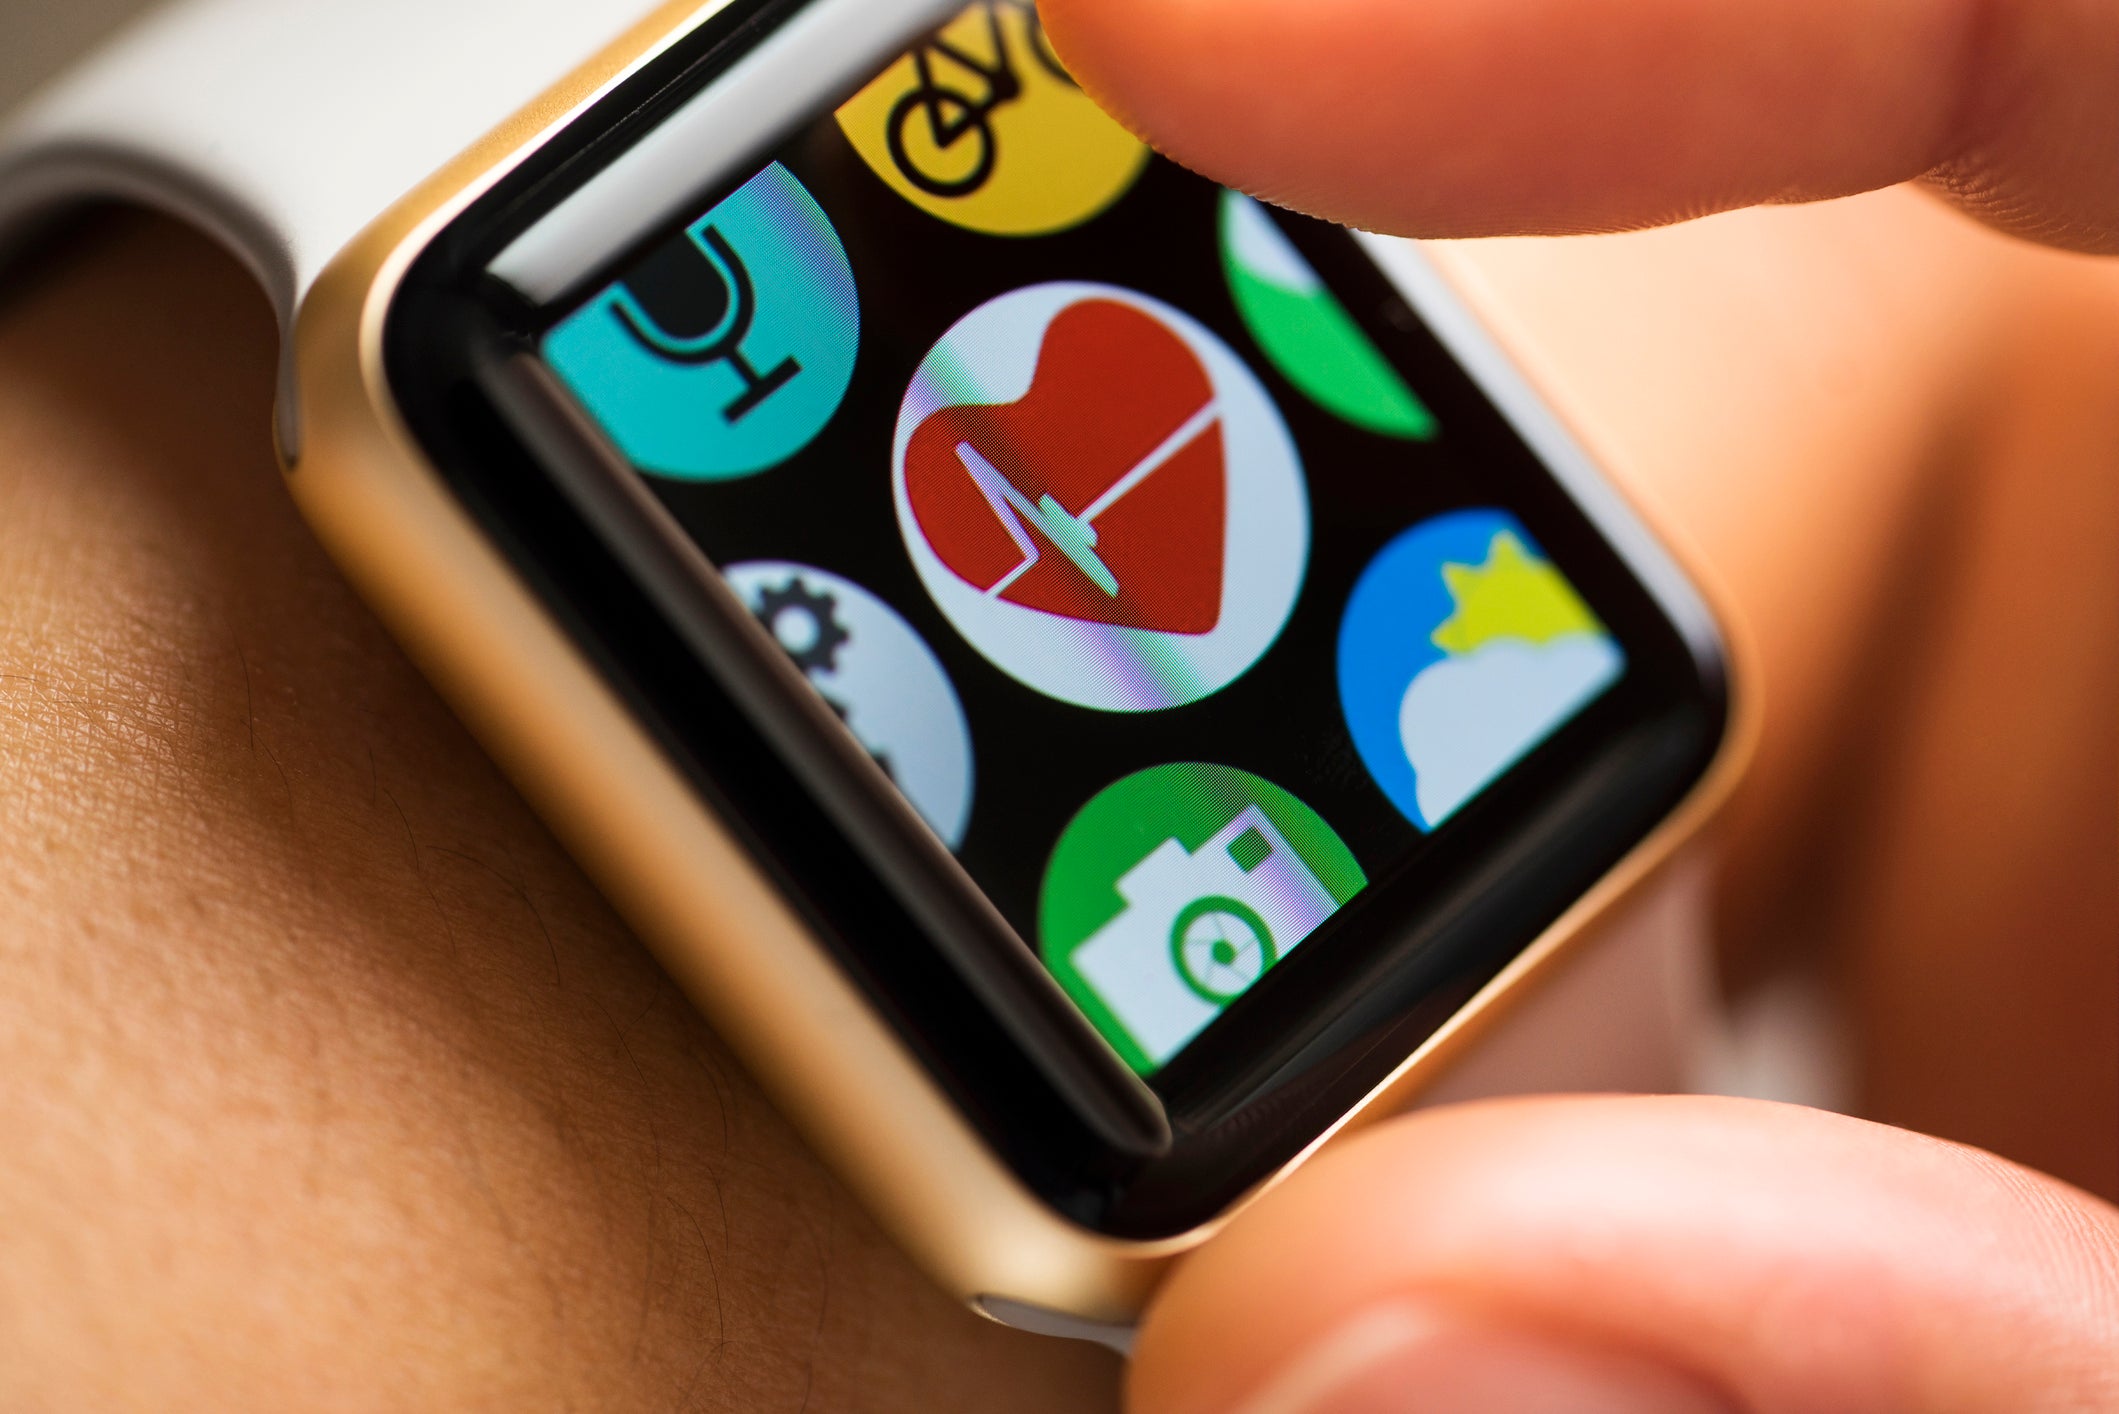 In addition to Apple, a number of companies make smartwatches that monitor a person’s ECG